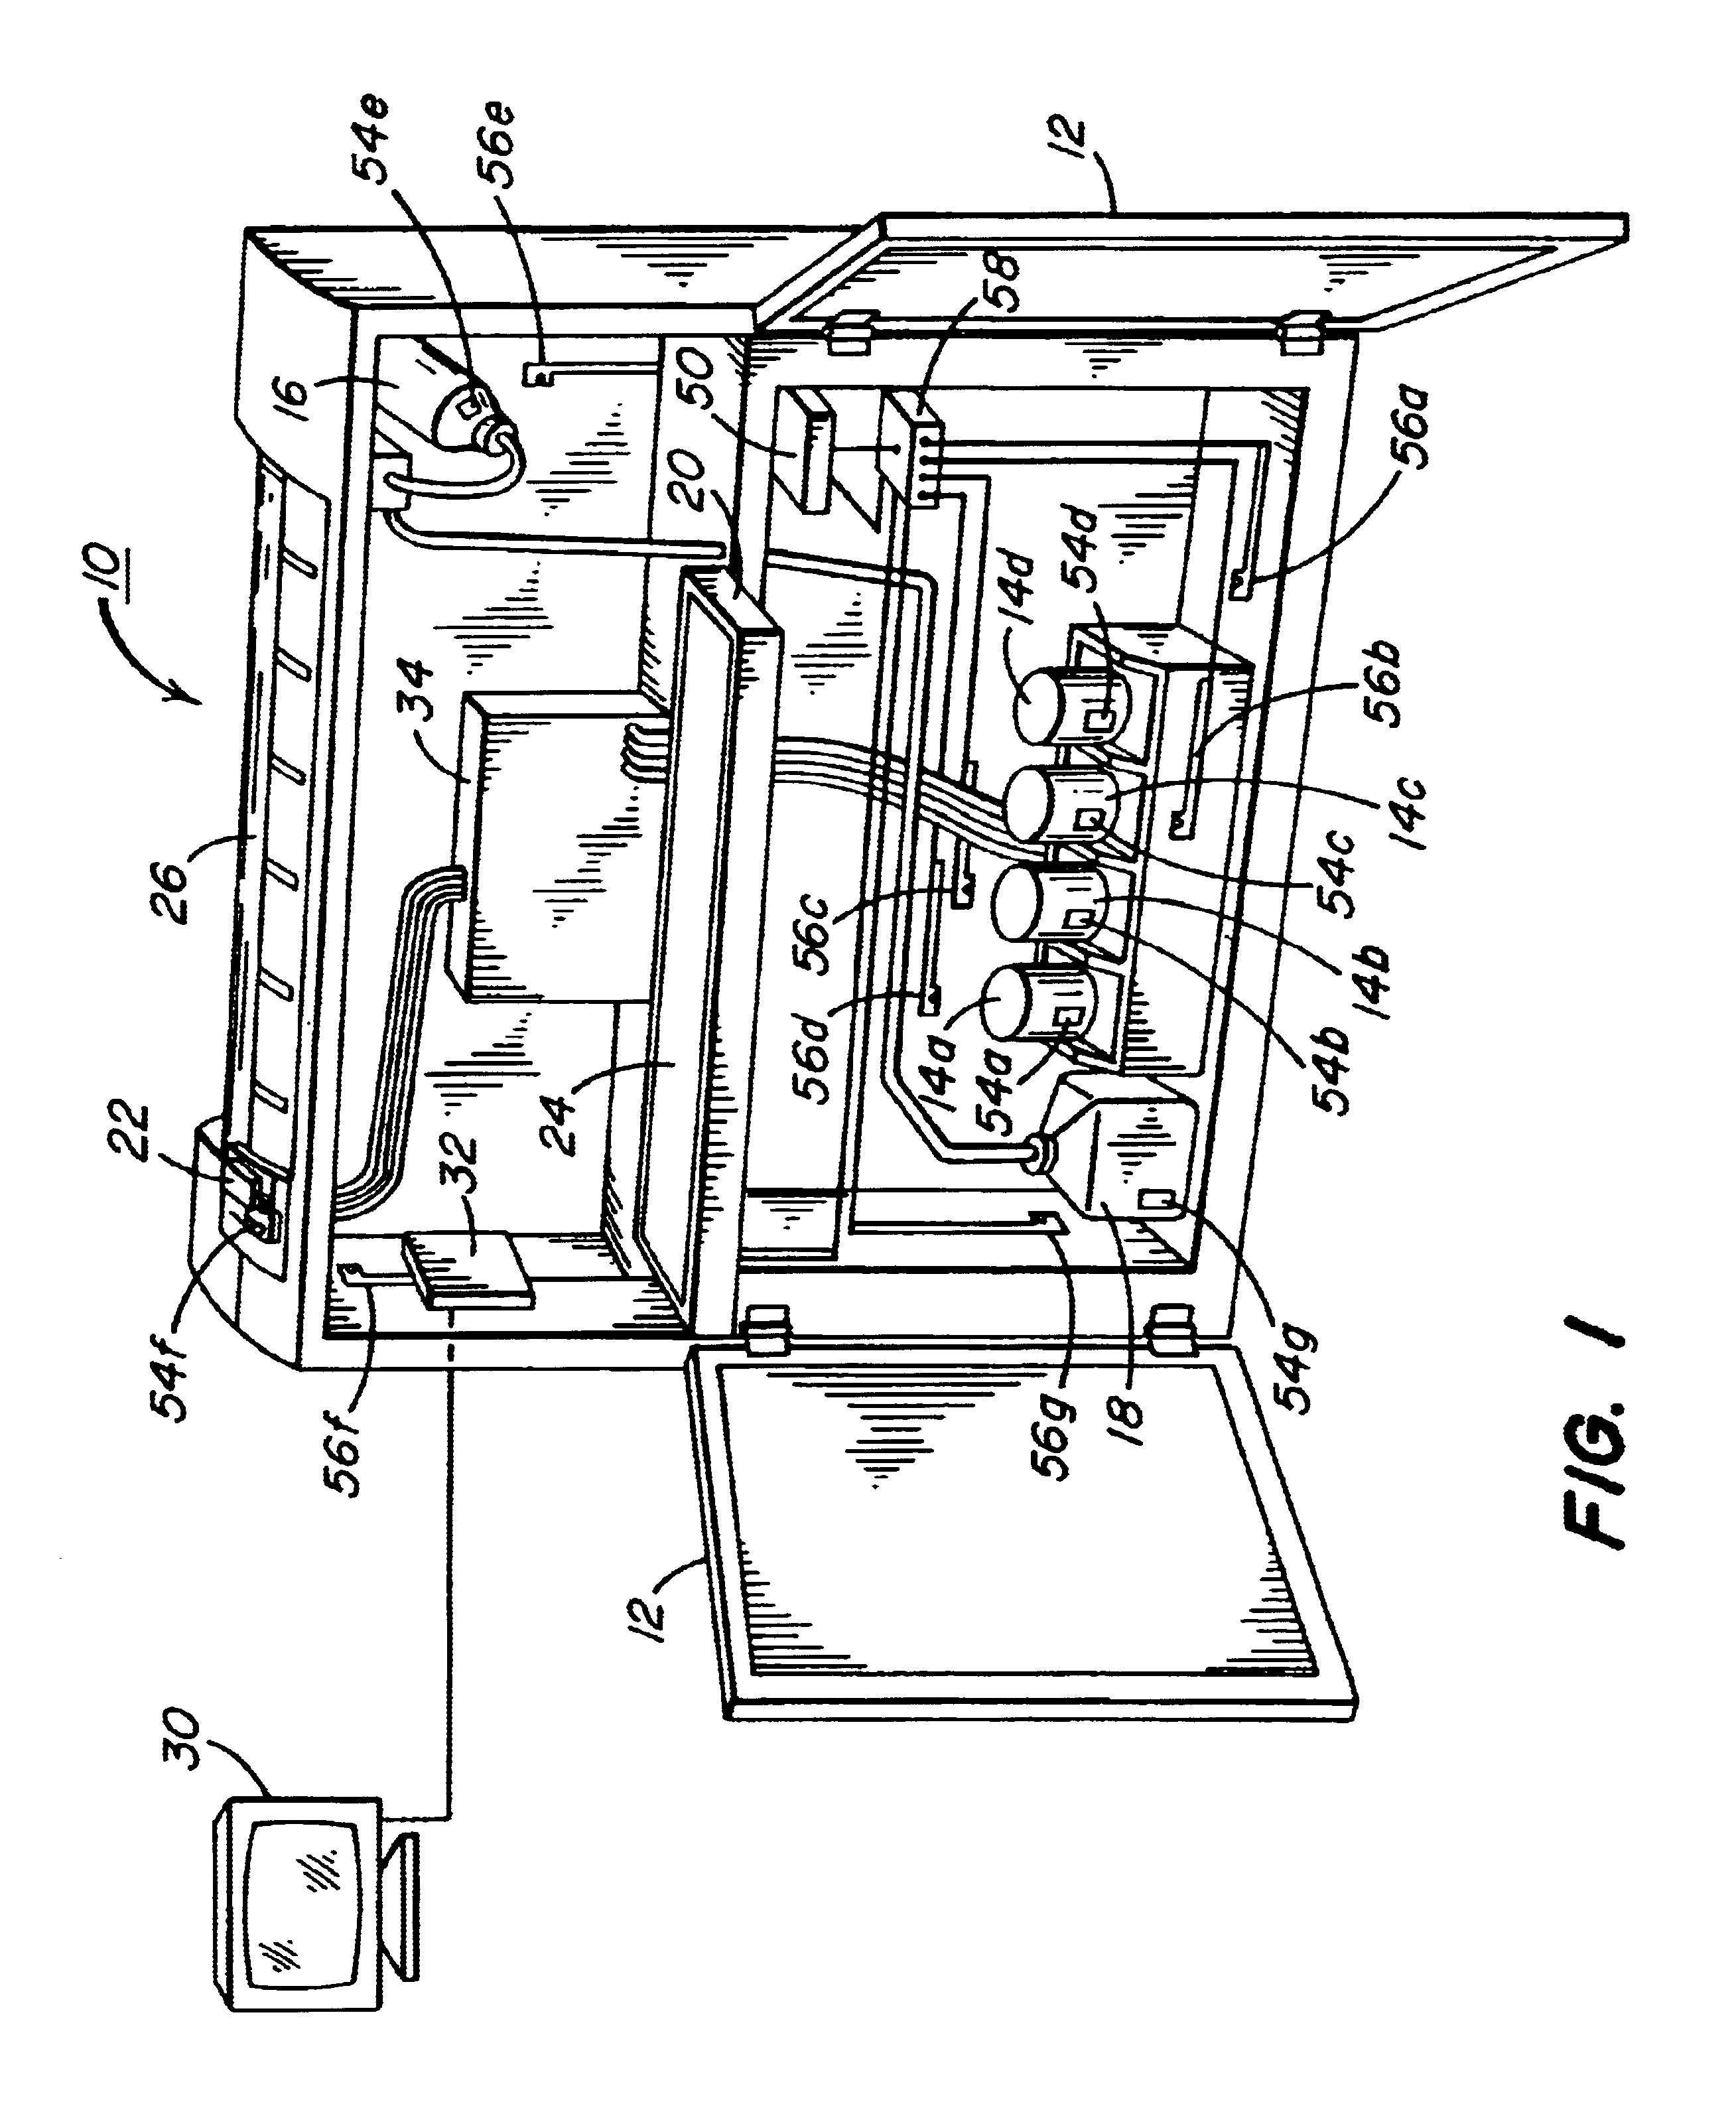 Printer and method therefor adapted to sense data uniquely associated with a consumable loaded into the printer